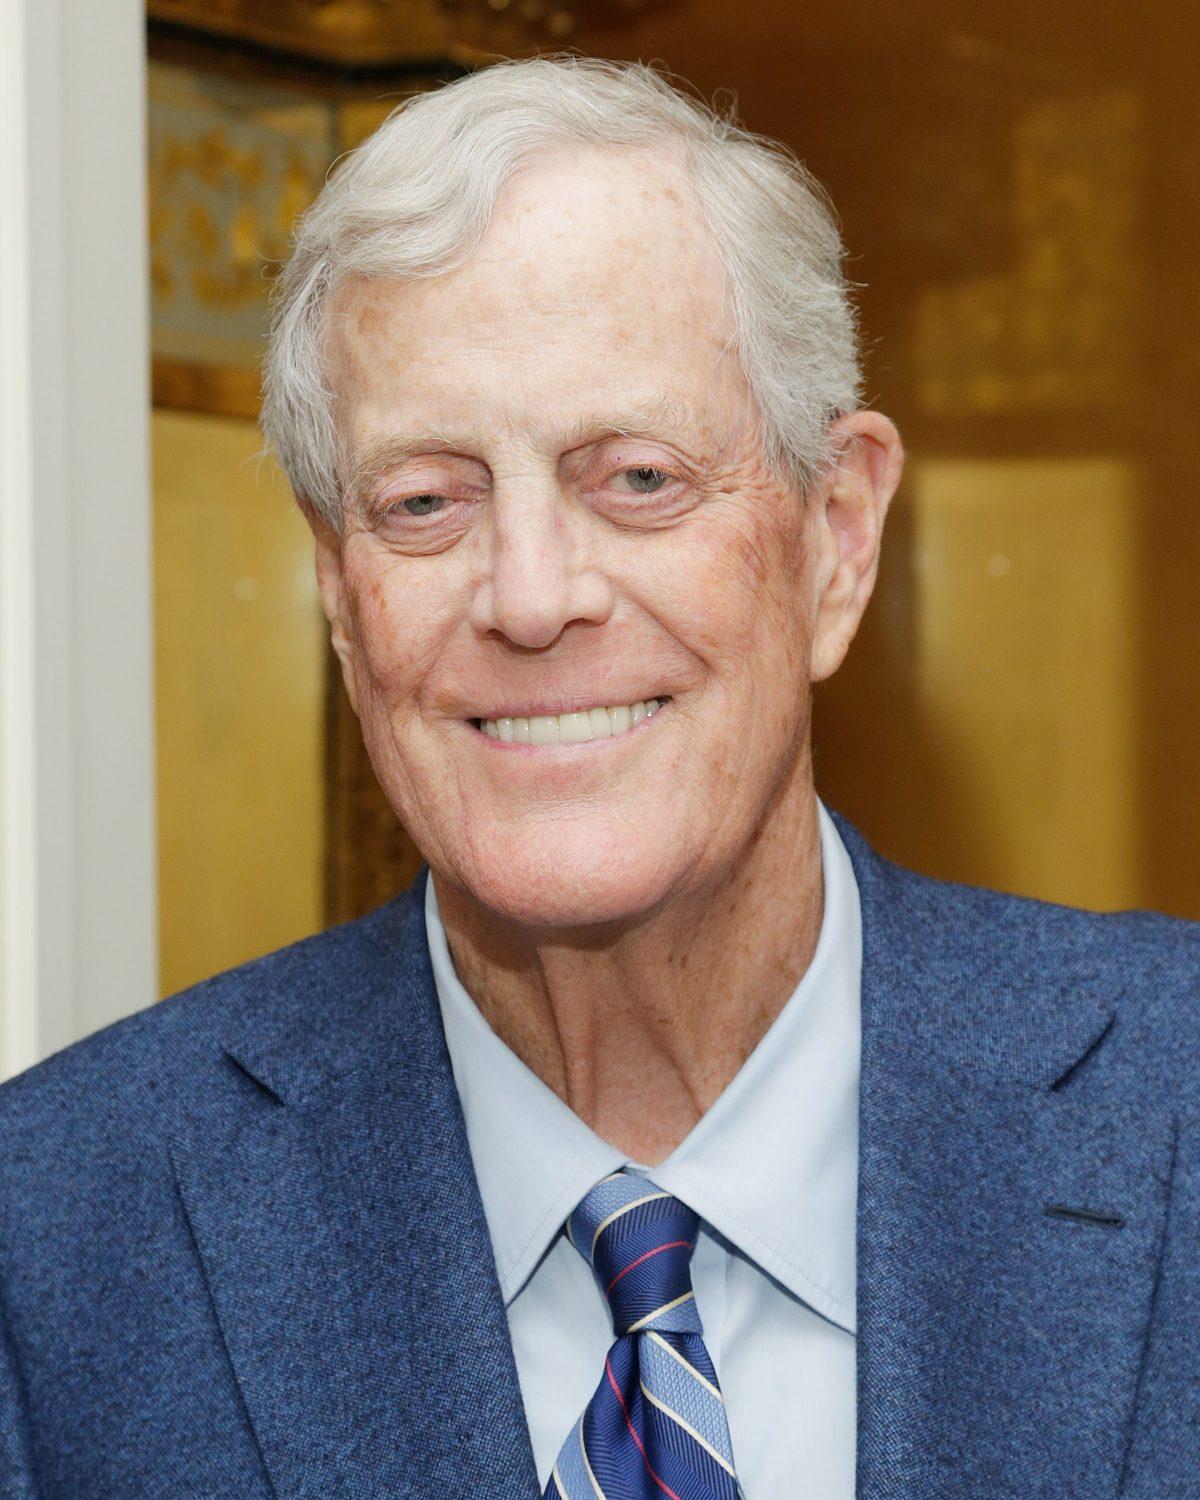 Philanthropist David H. Koch attends the U.S. Olympic And Paralympic Foundation Event Hosted By Ellen and Daniel Crown in New York City on May 17, 2017. (Lars Niki/Getty Images for United States Olympic Committee)